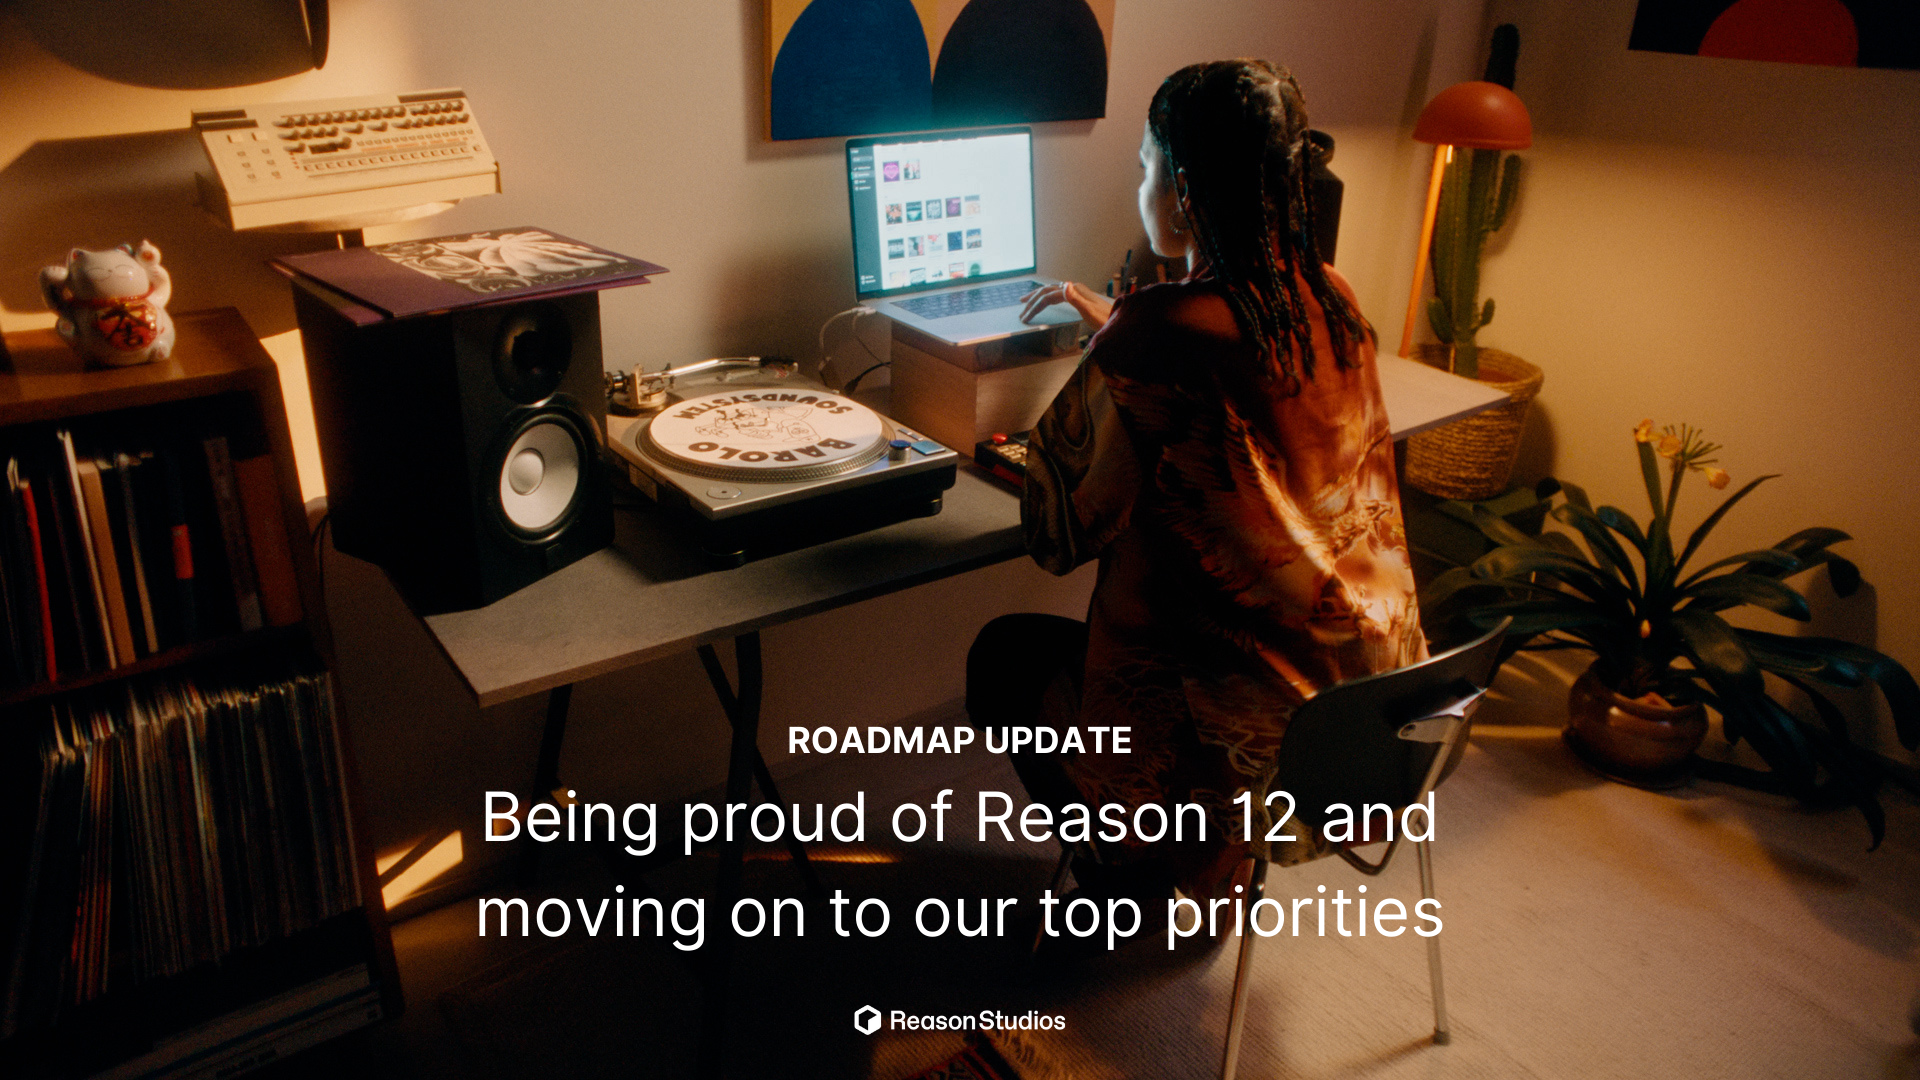 Being proud of Reason 12 while moving on with top priorities